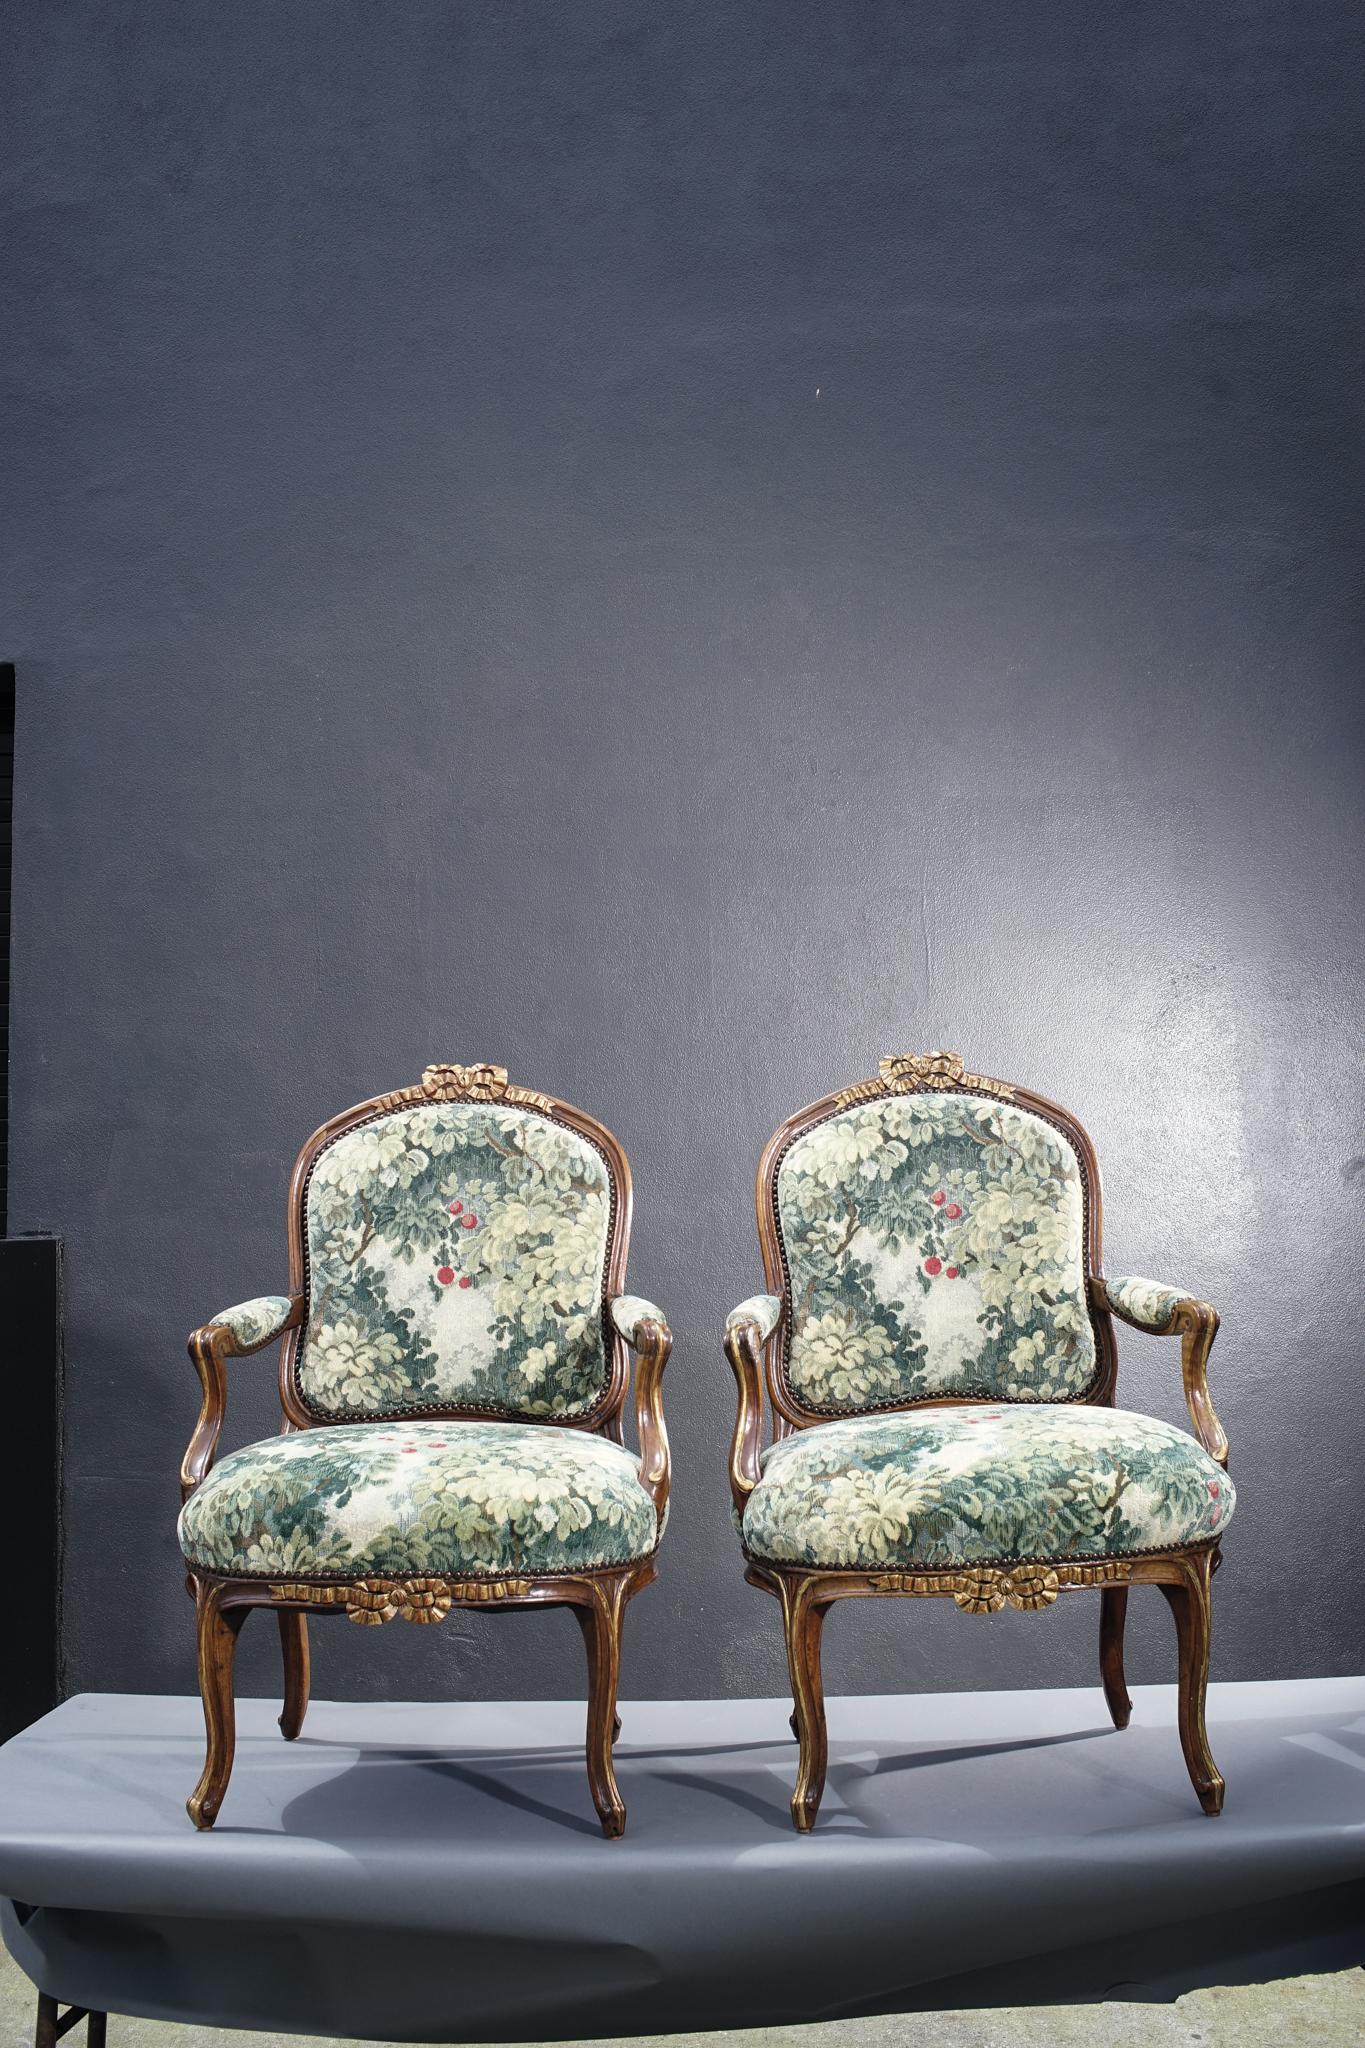 Pair of 19th century French walnut armchairs with carved bow motif. Newly upholstered in old world weavers fabric.